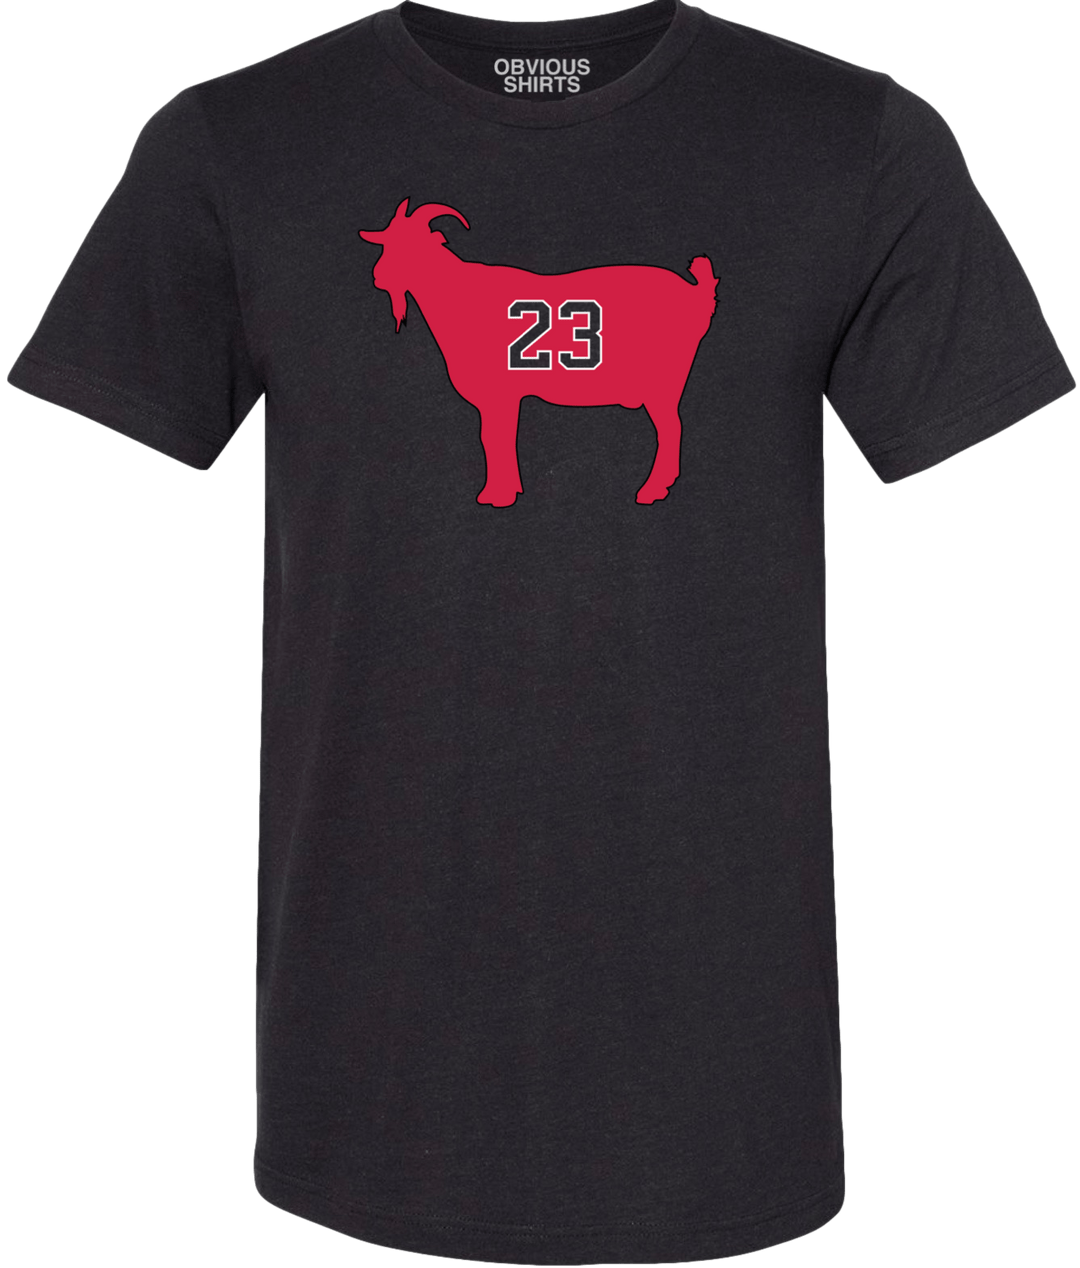 BASKETBALL'S GOAT. - OBVIOUS SHIRTS